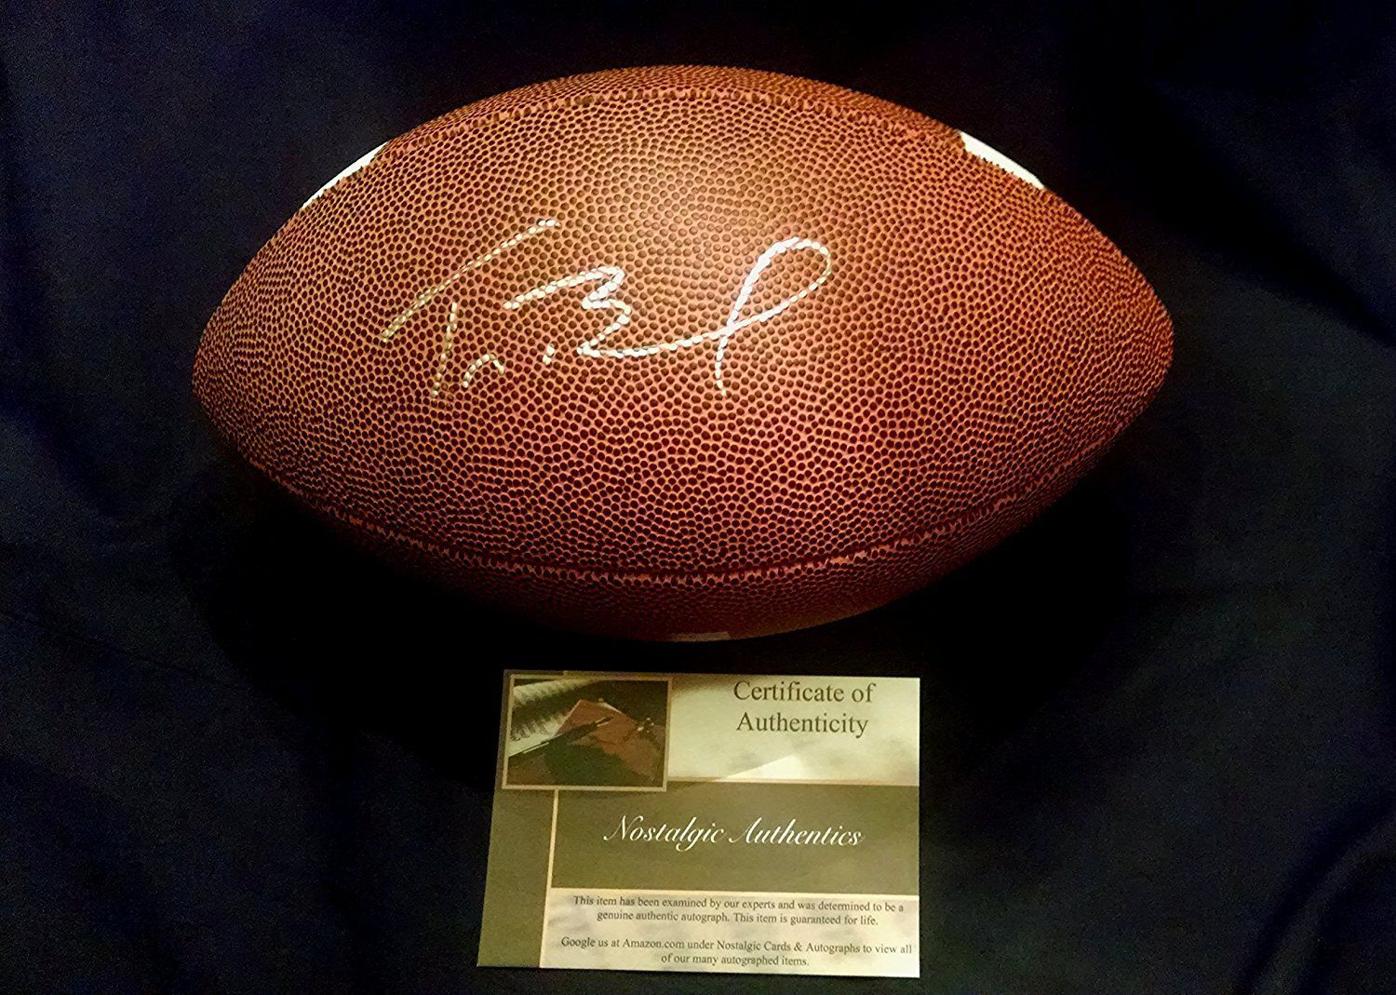 Tom Brady signed football to be auctioned for Attleboro High